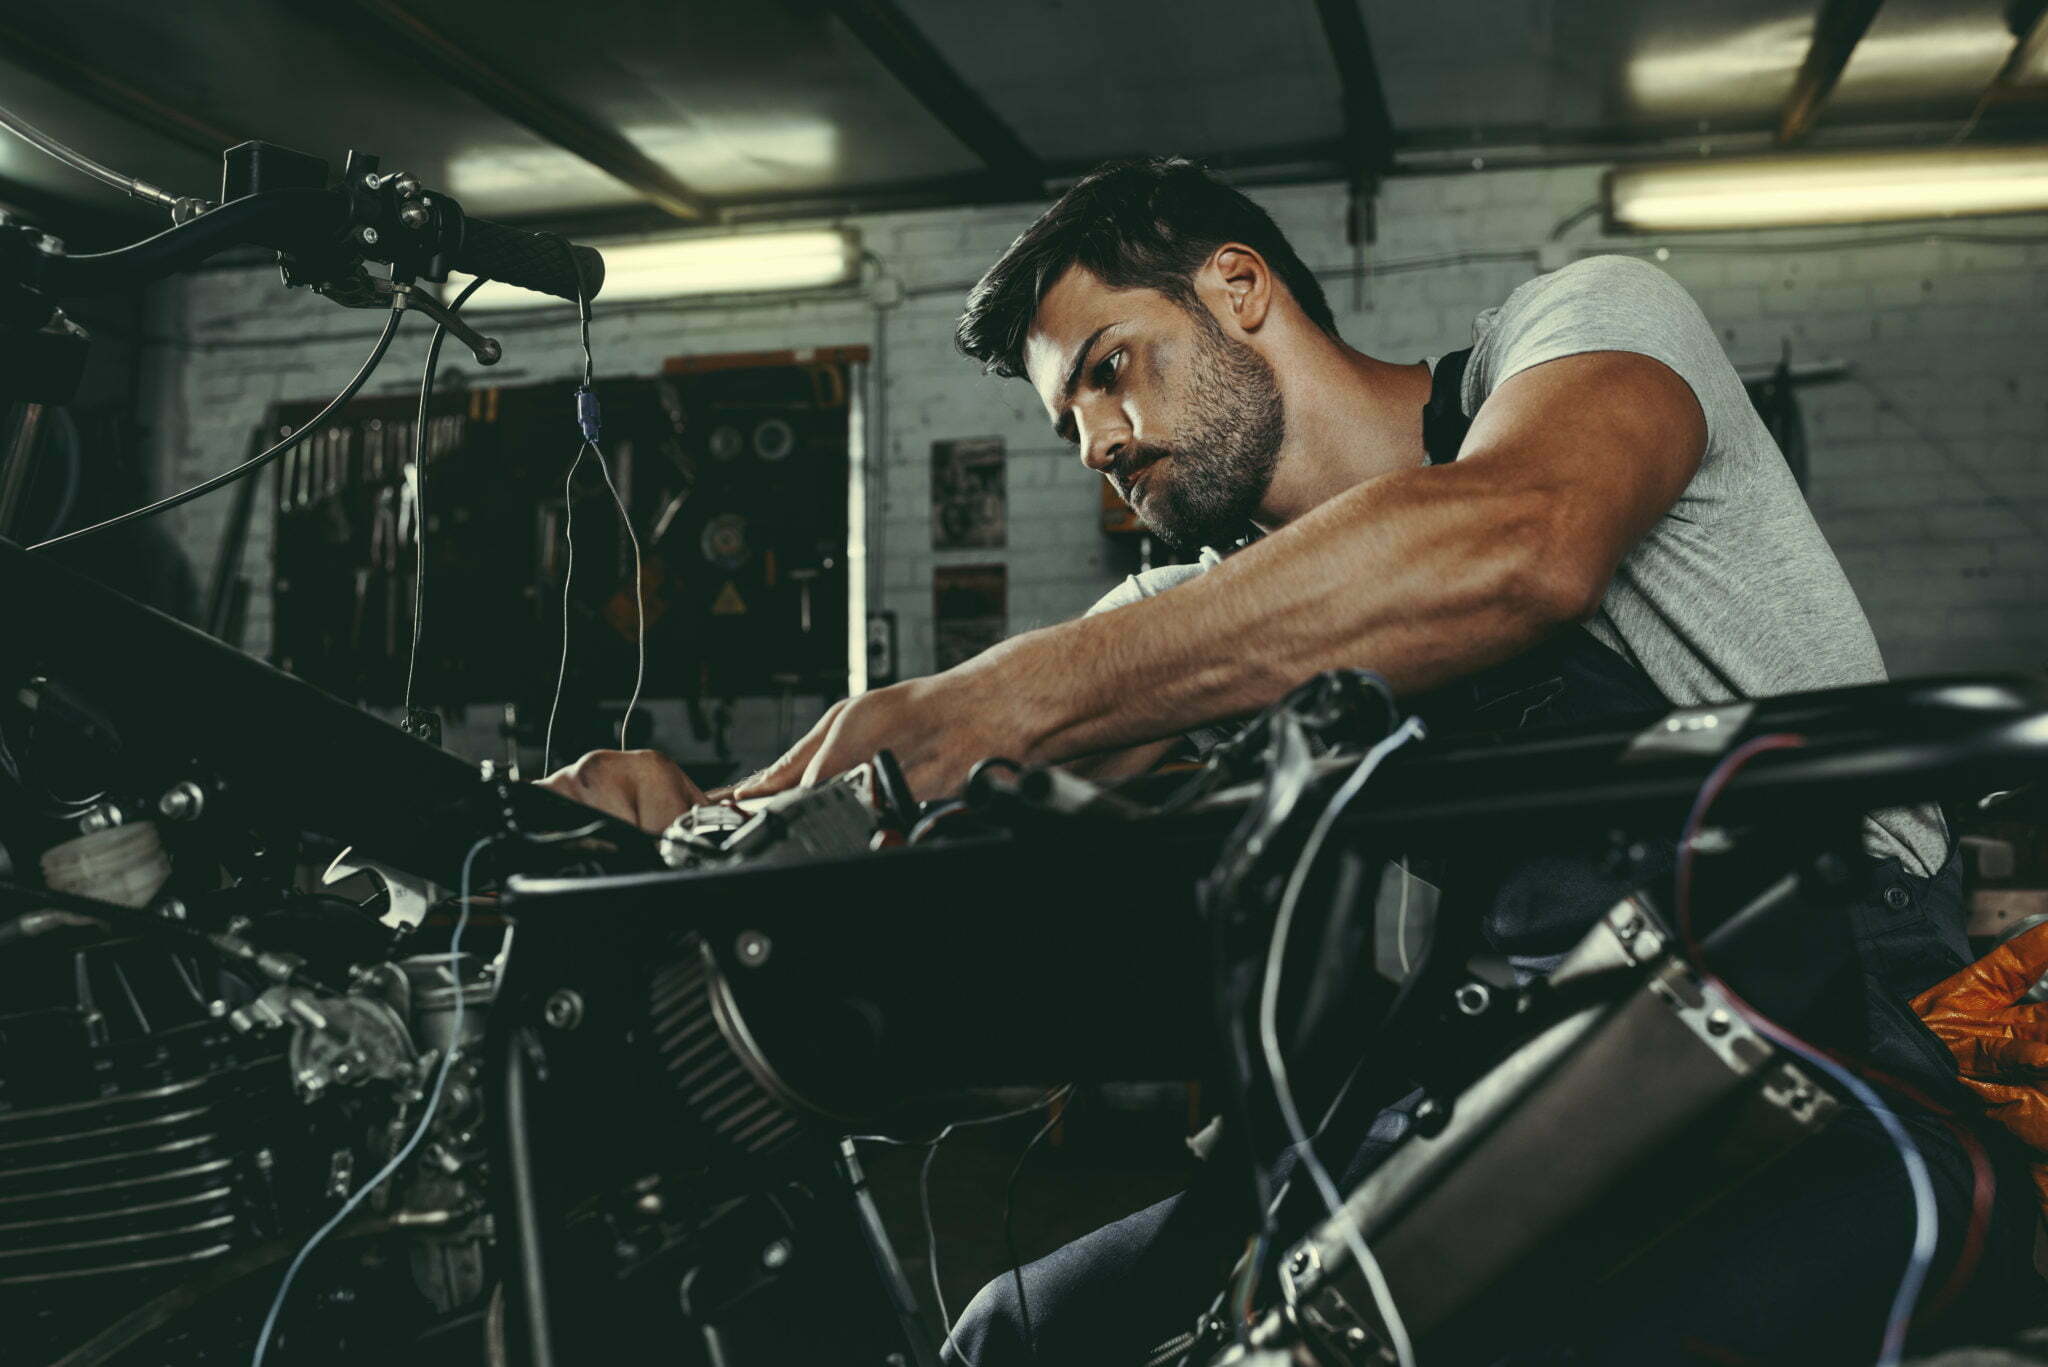 How to Become a Motorcycle Mechanic - Careers & Education